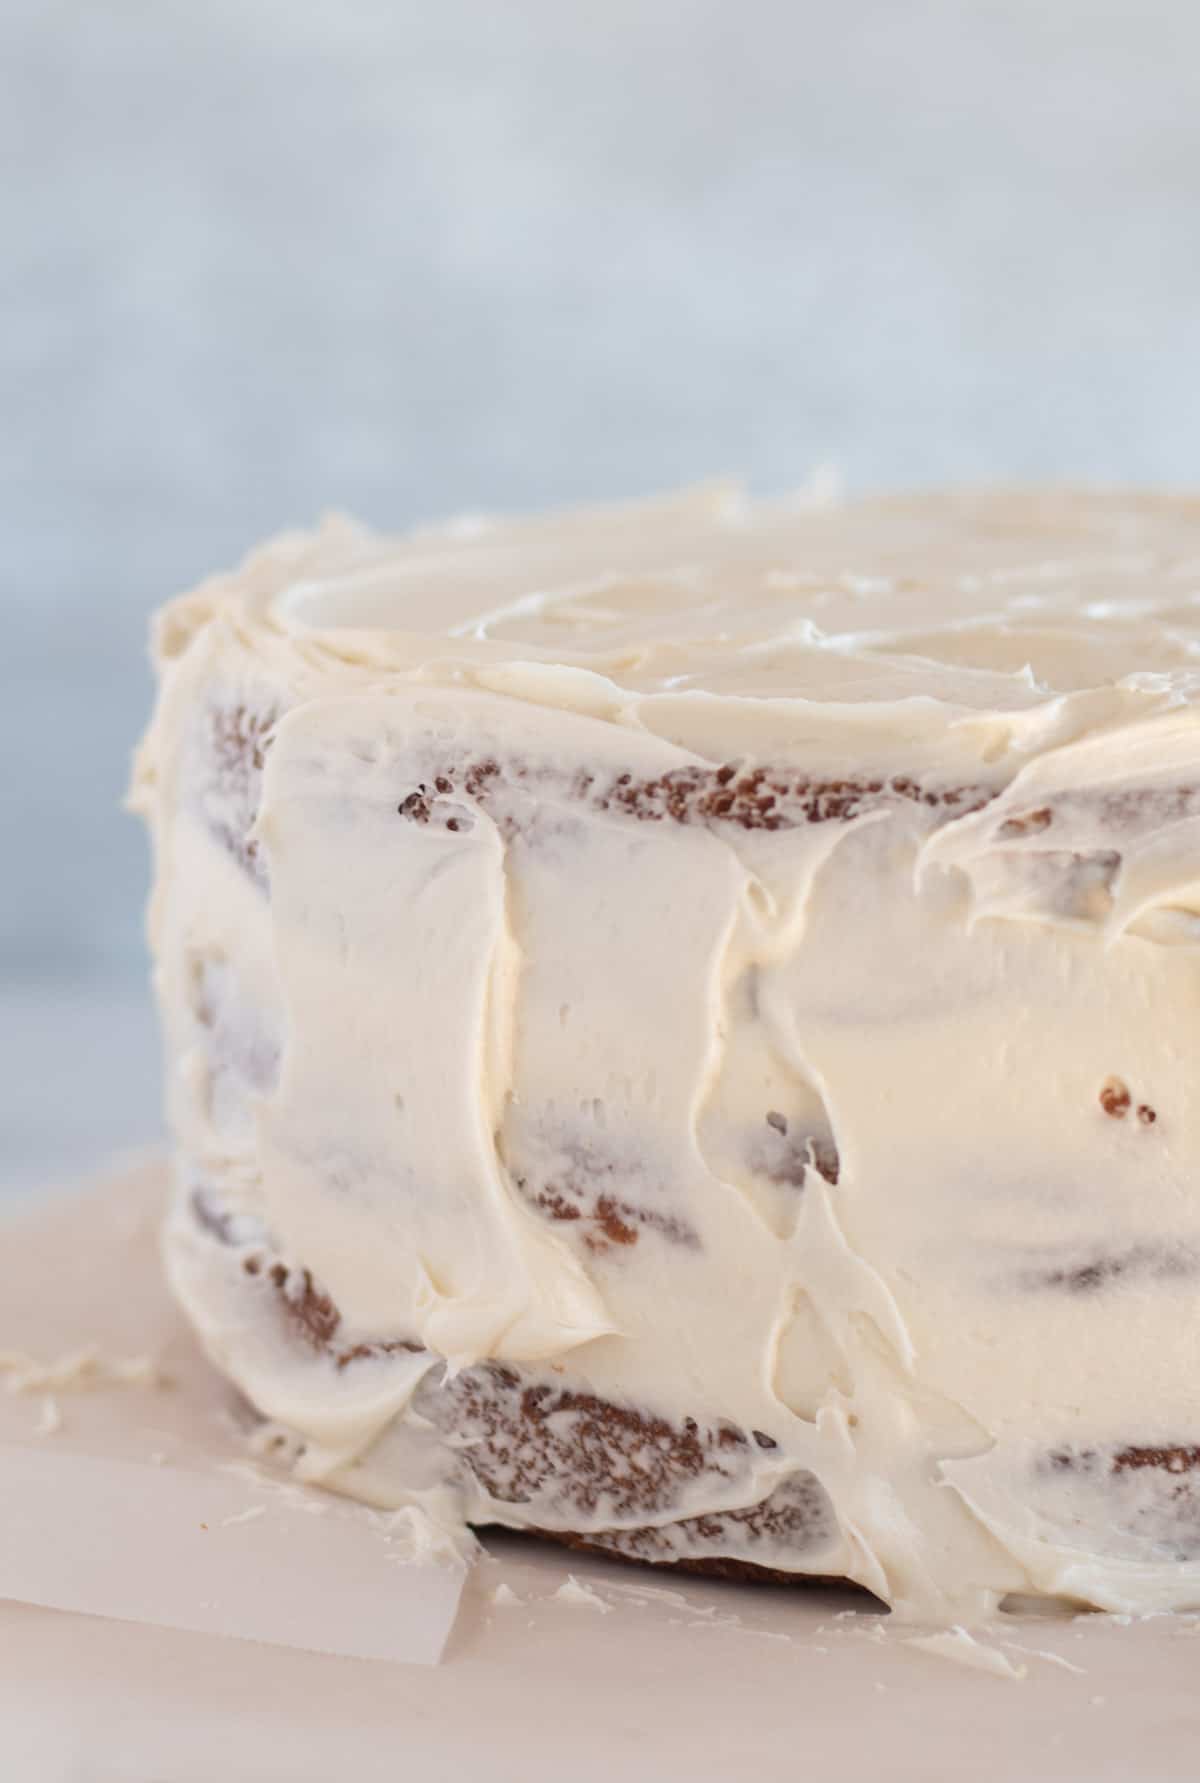 messy frosting all around cake